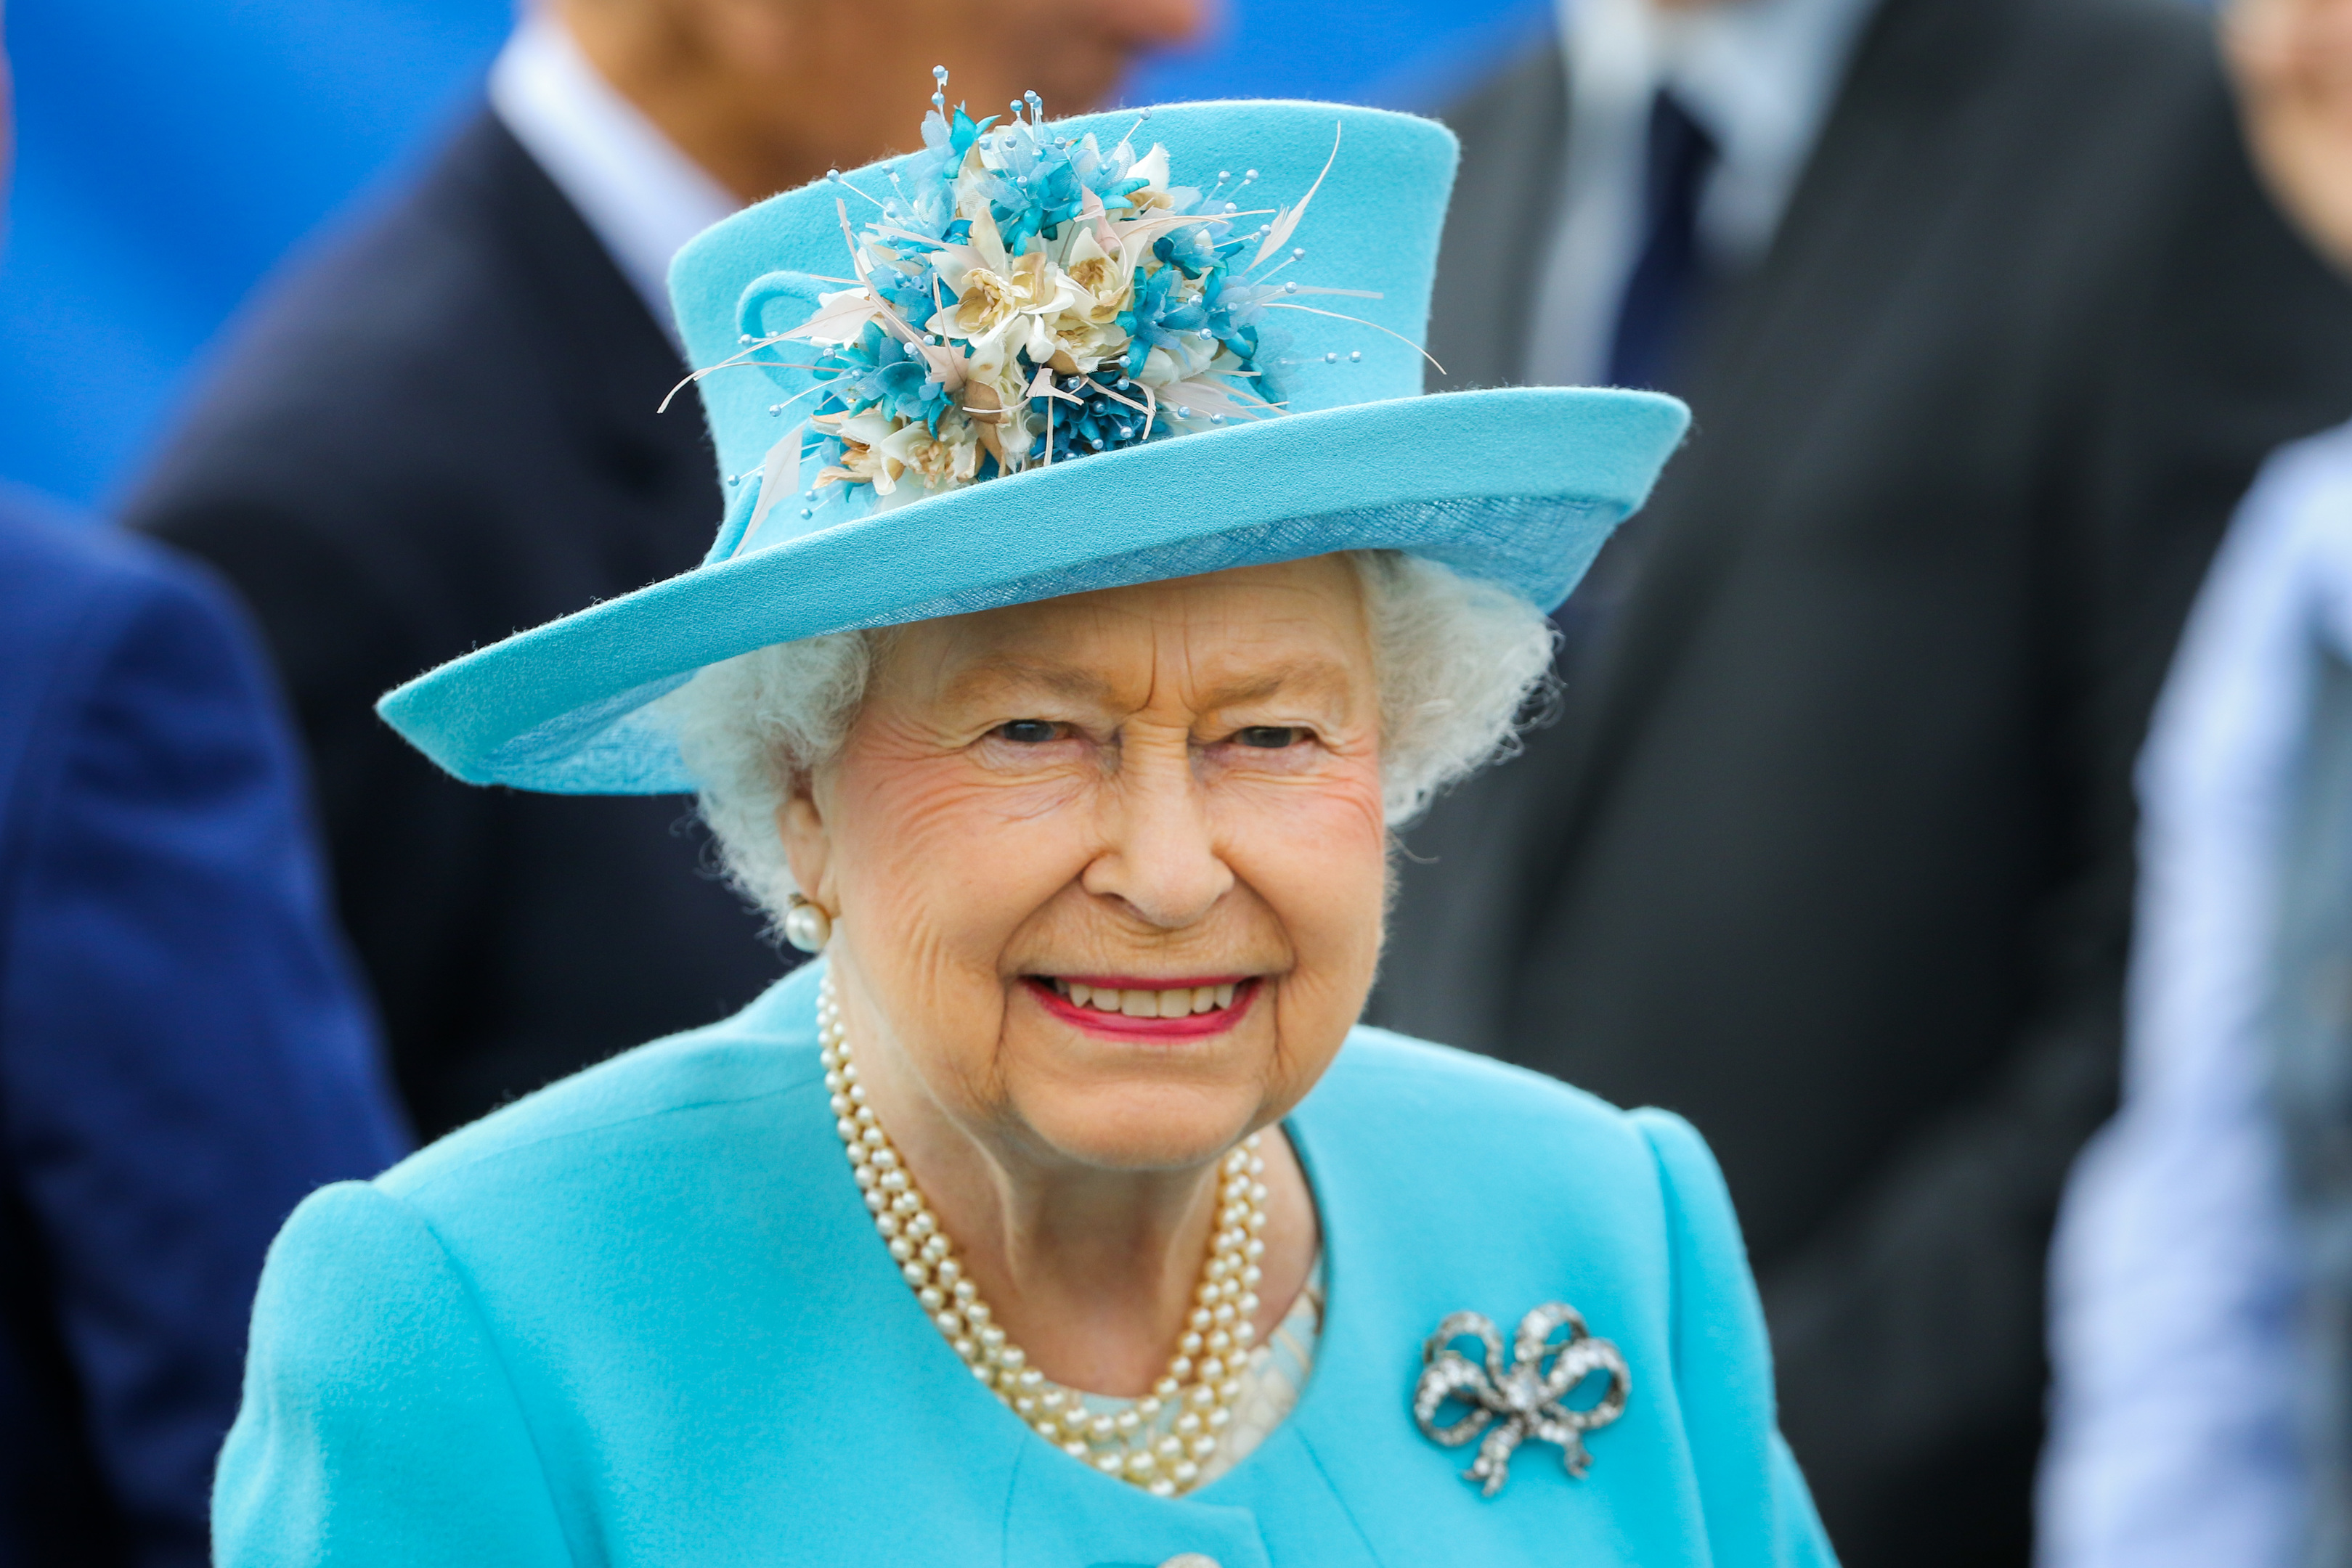 The Queen, pictured during her recent visit to Dundee.